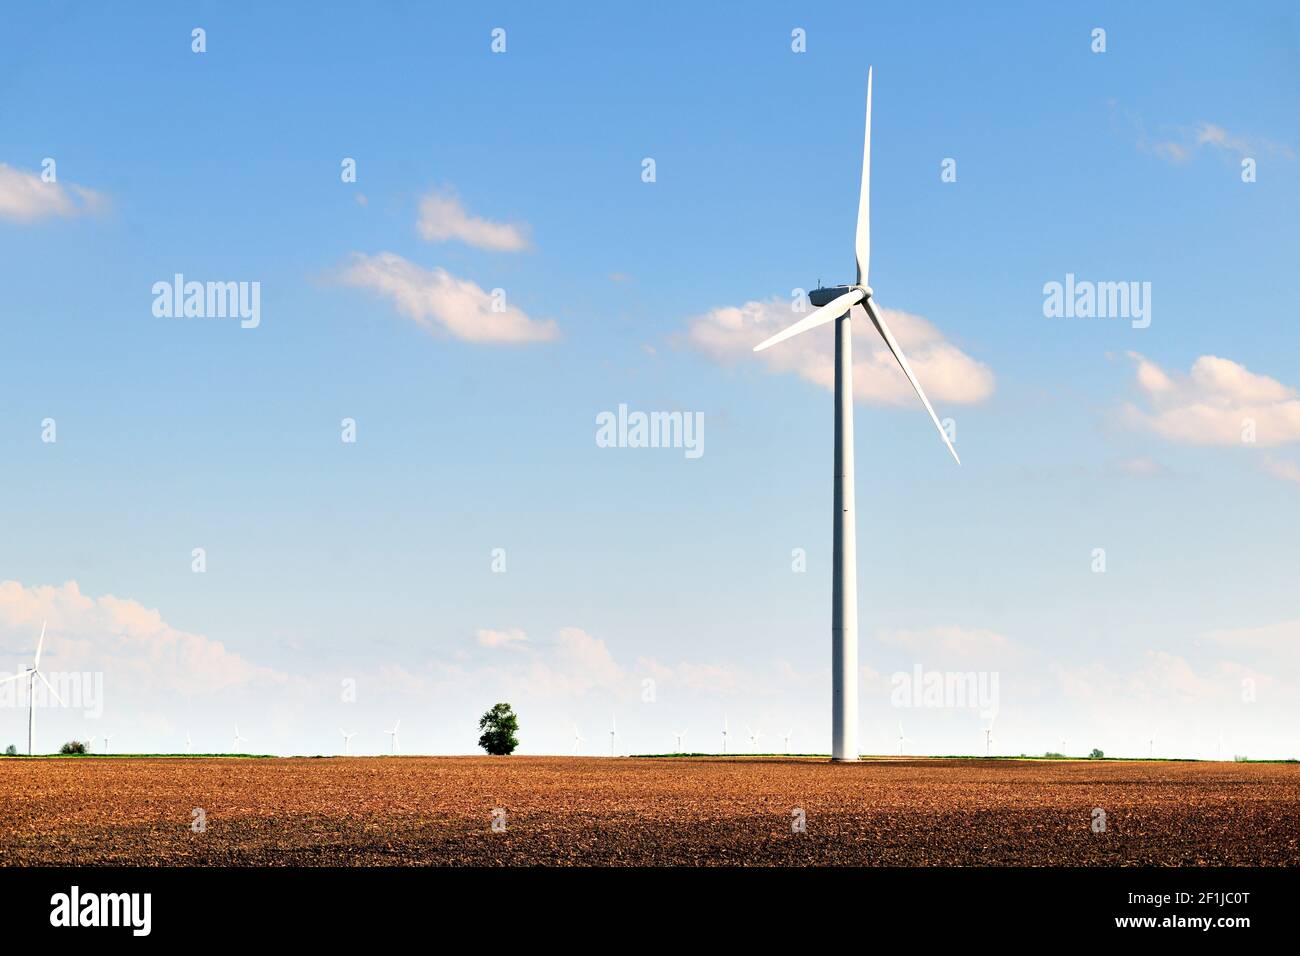 Malta, Illinois, USA. A wind turbine dominates a section of a large field of yet-to-be seen crops. Stock Photo